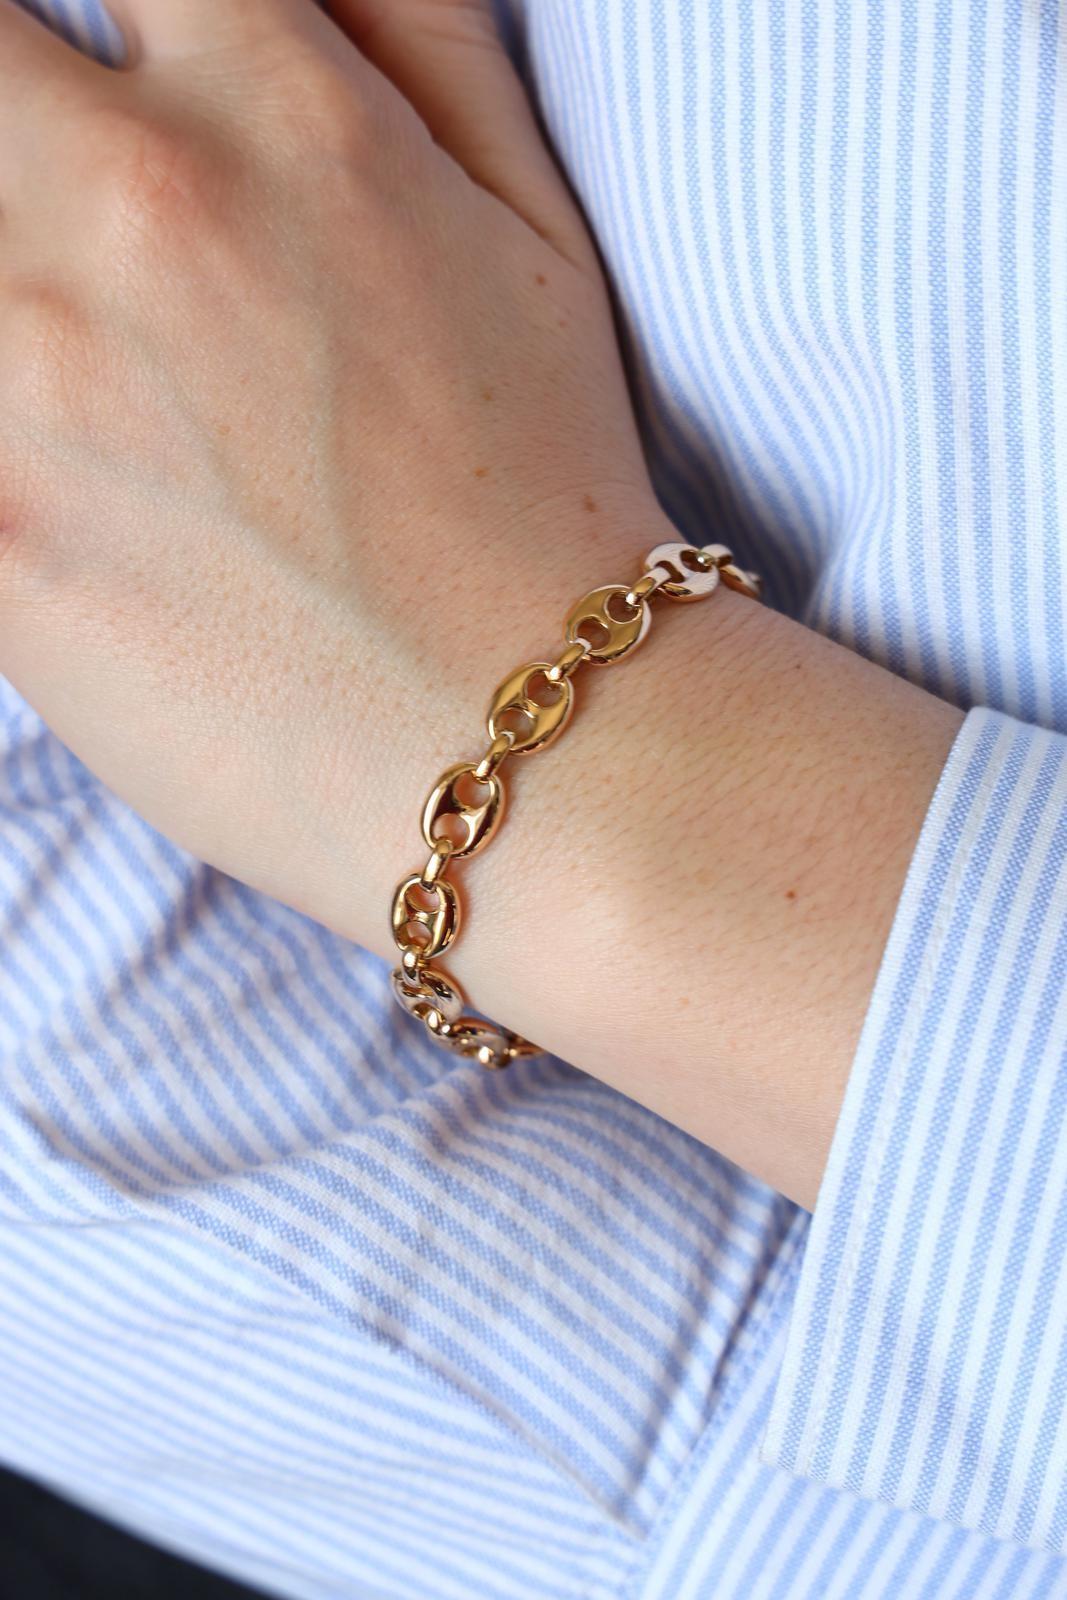 Bracelet in yellow gold 750 thousandths (18 carats). coffee bean mesh. length: 19 cm. width: 0.81 cm. total weight: 25.94 g. clasp with heigt of safety. eagle head hallmark. excellent condition